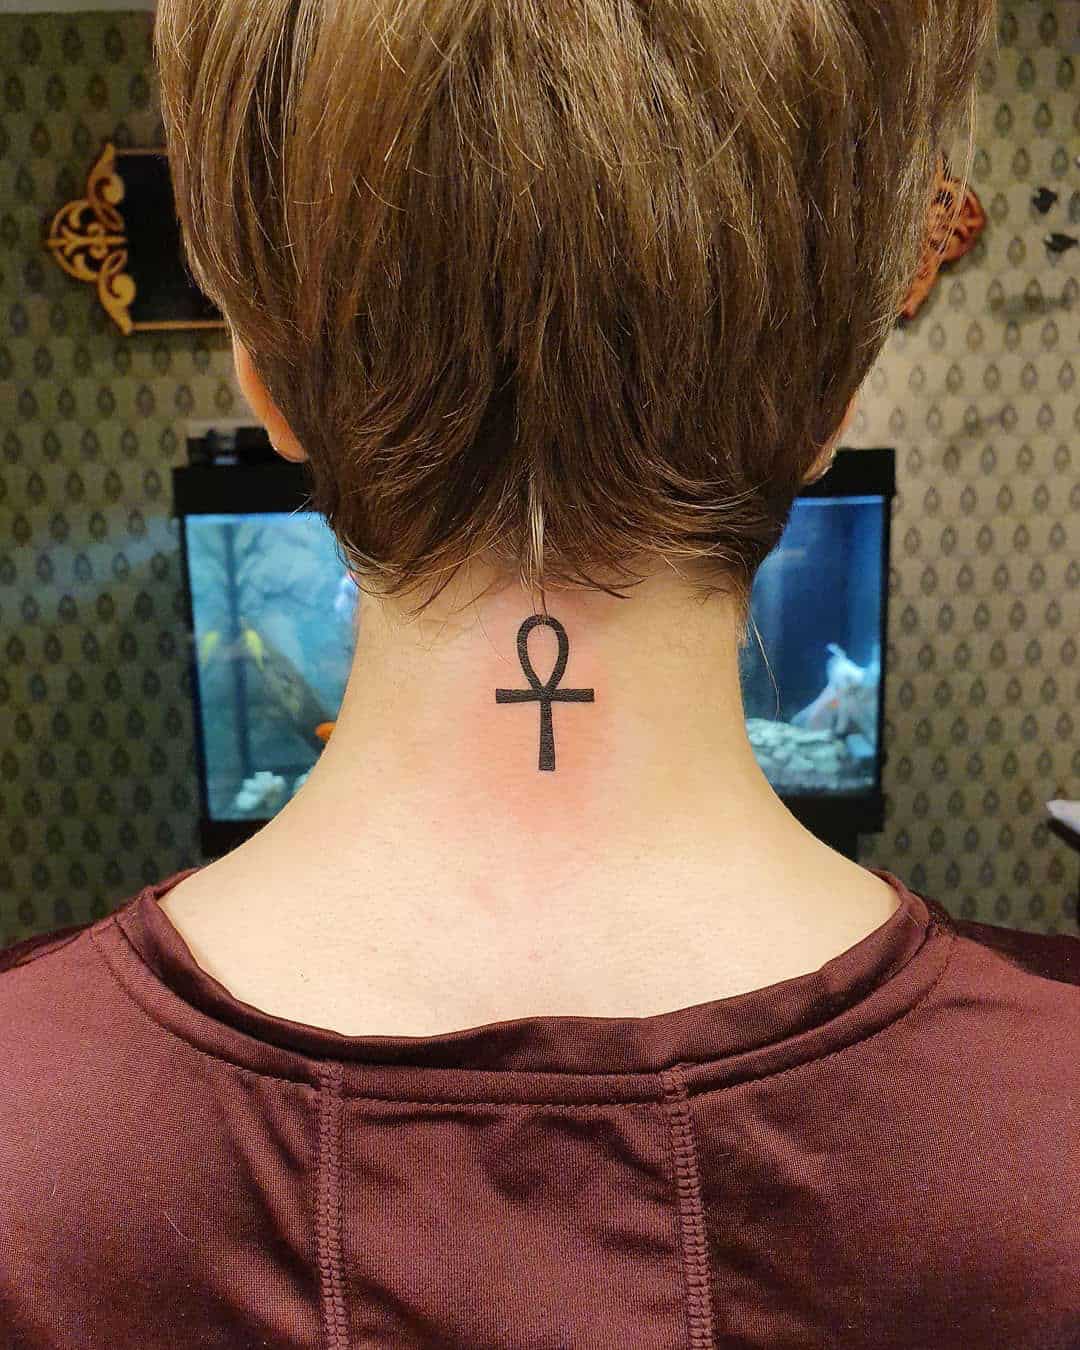 Meaning of Ankh tattoo and some examples